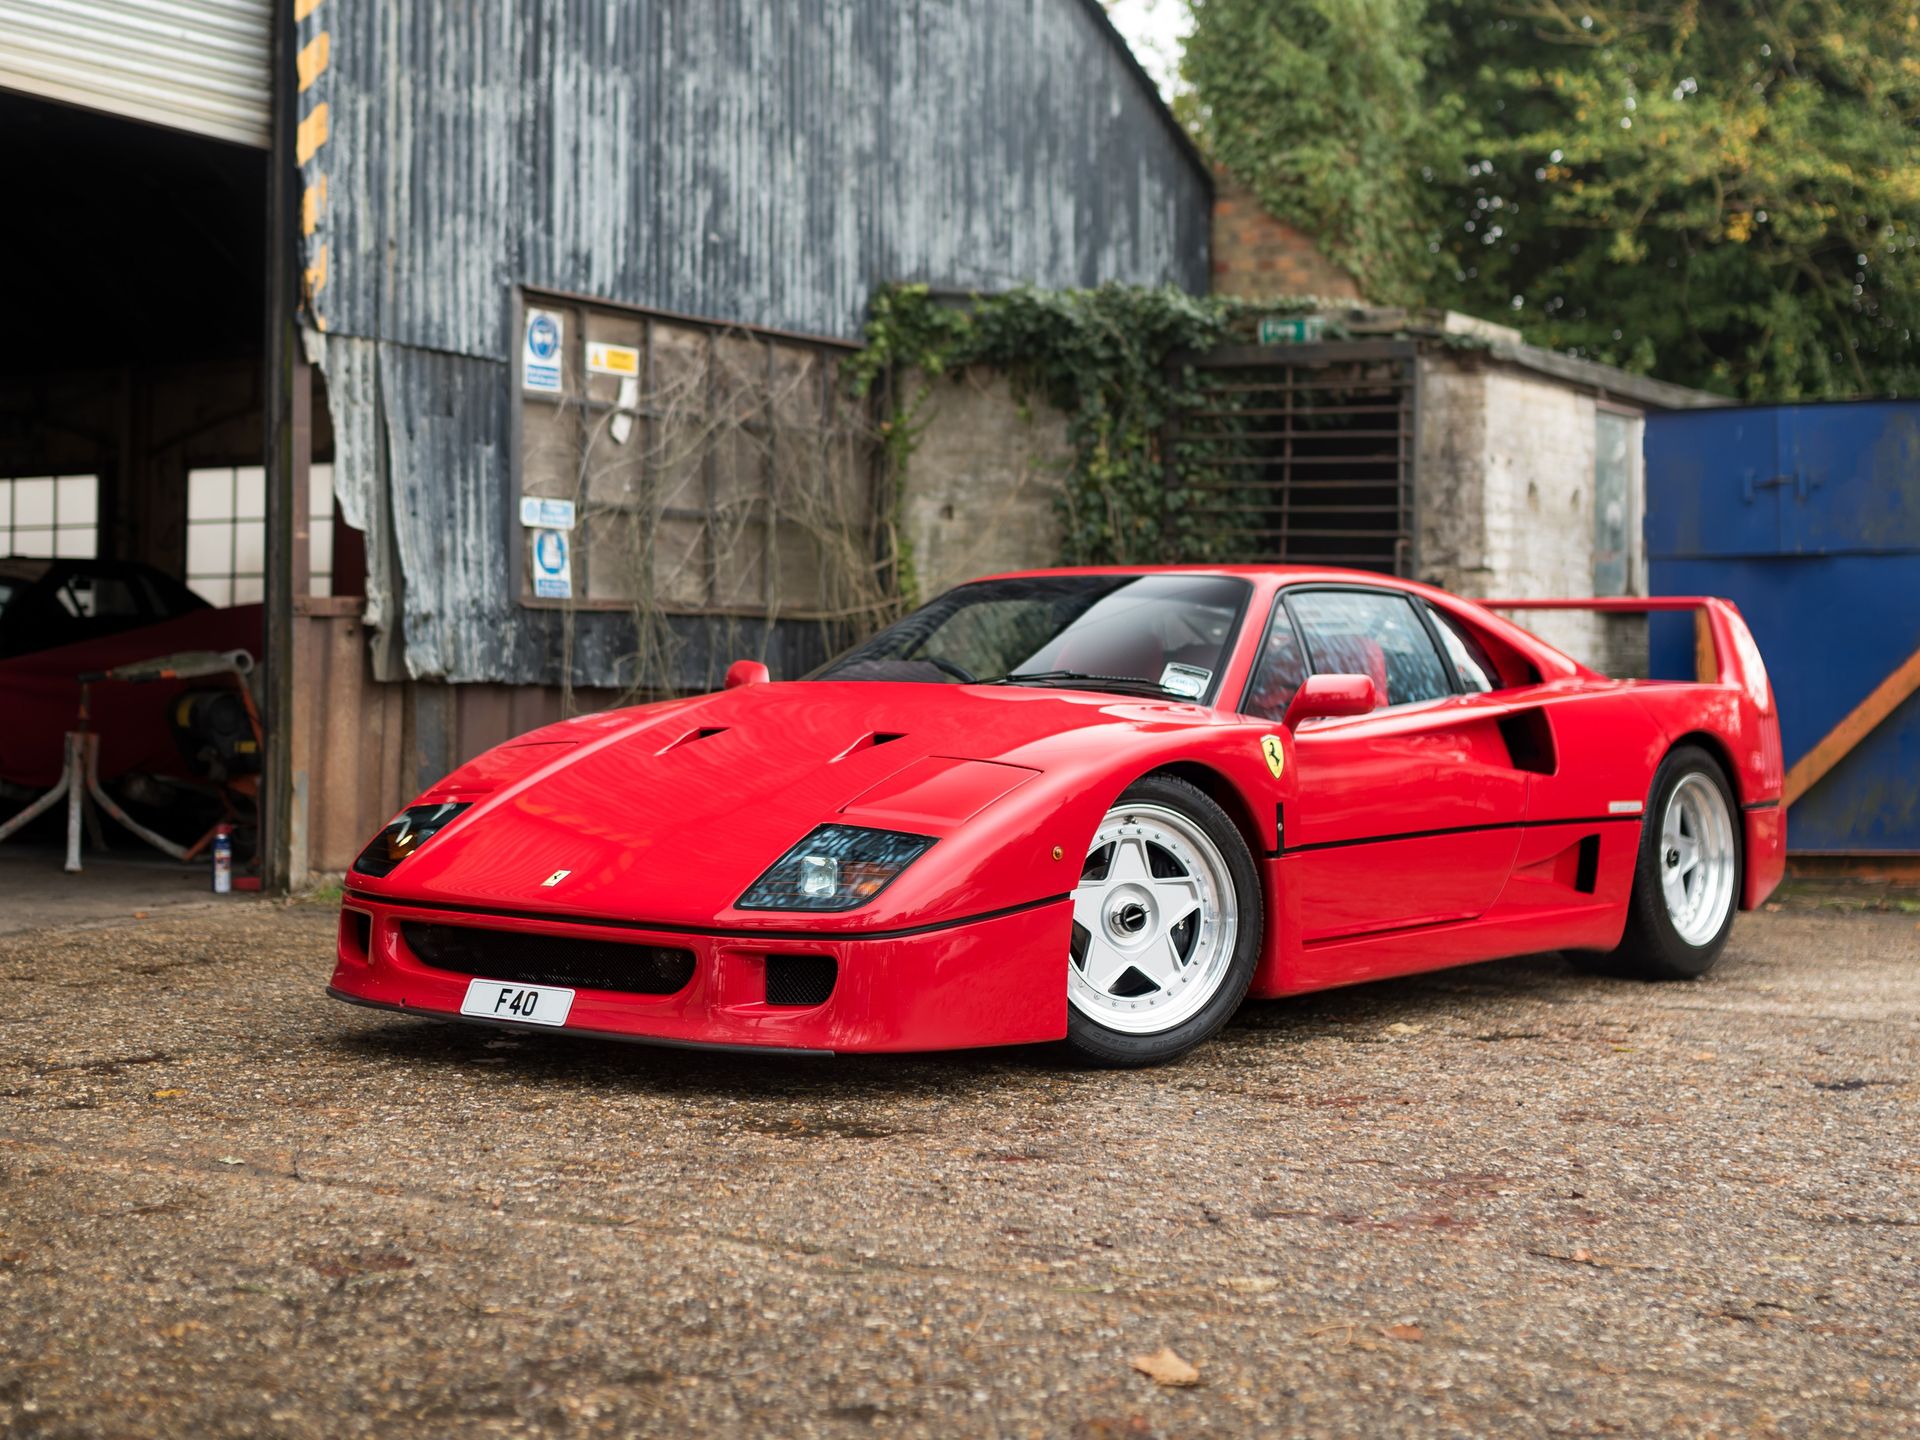 F40 in the yard at GTO Engineering